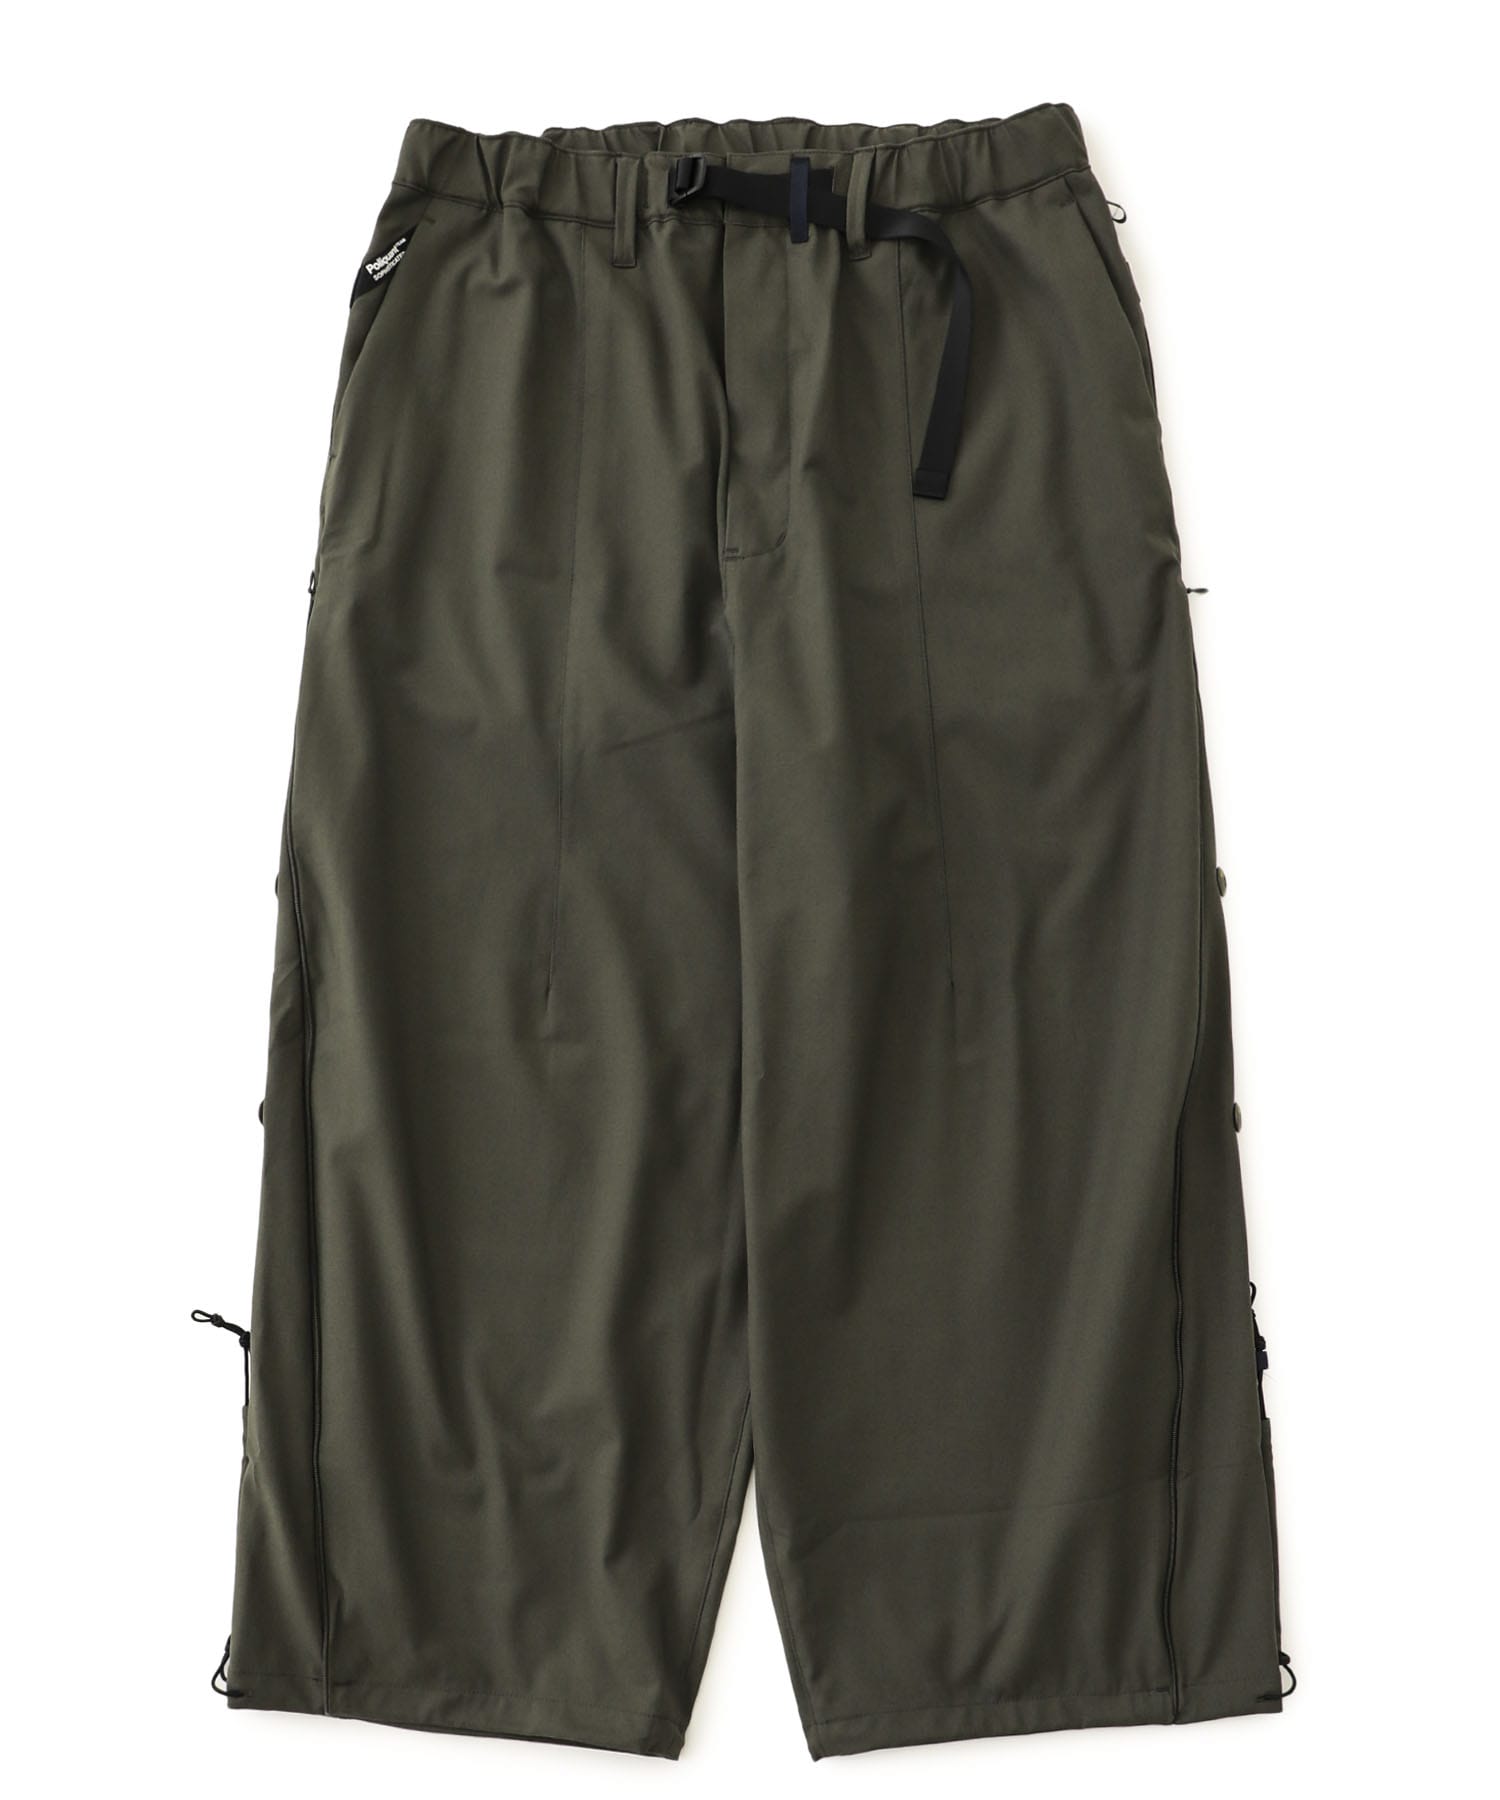 THE CHANGING WIDTH ADJUSTABLE TROUSER